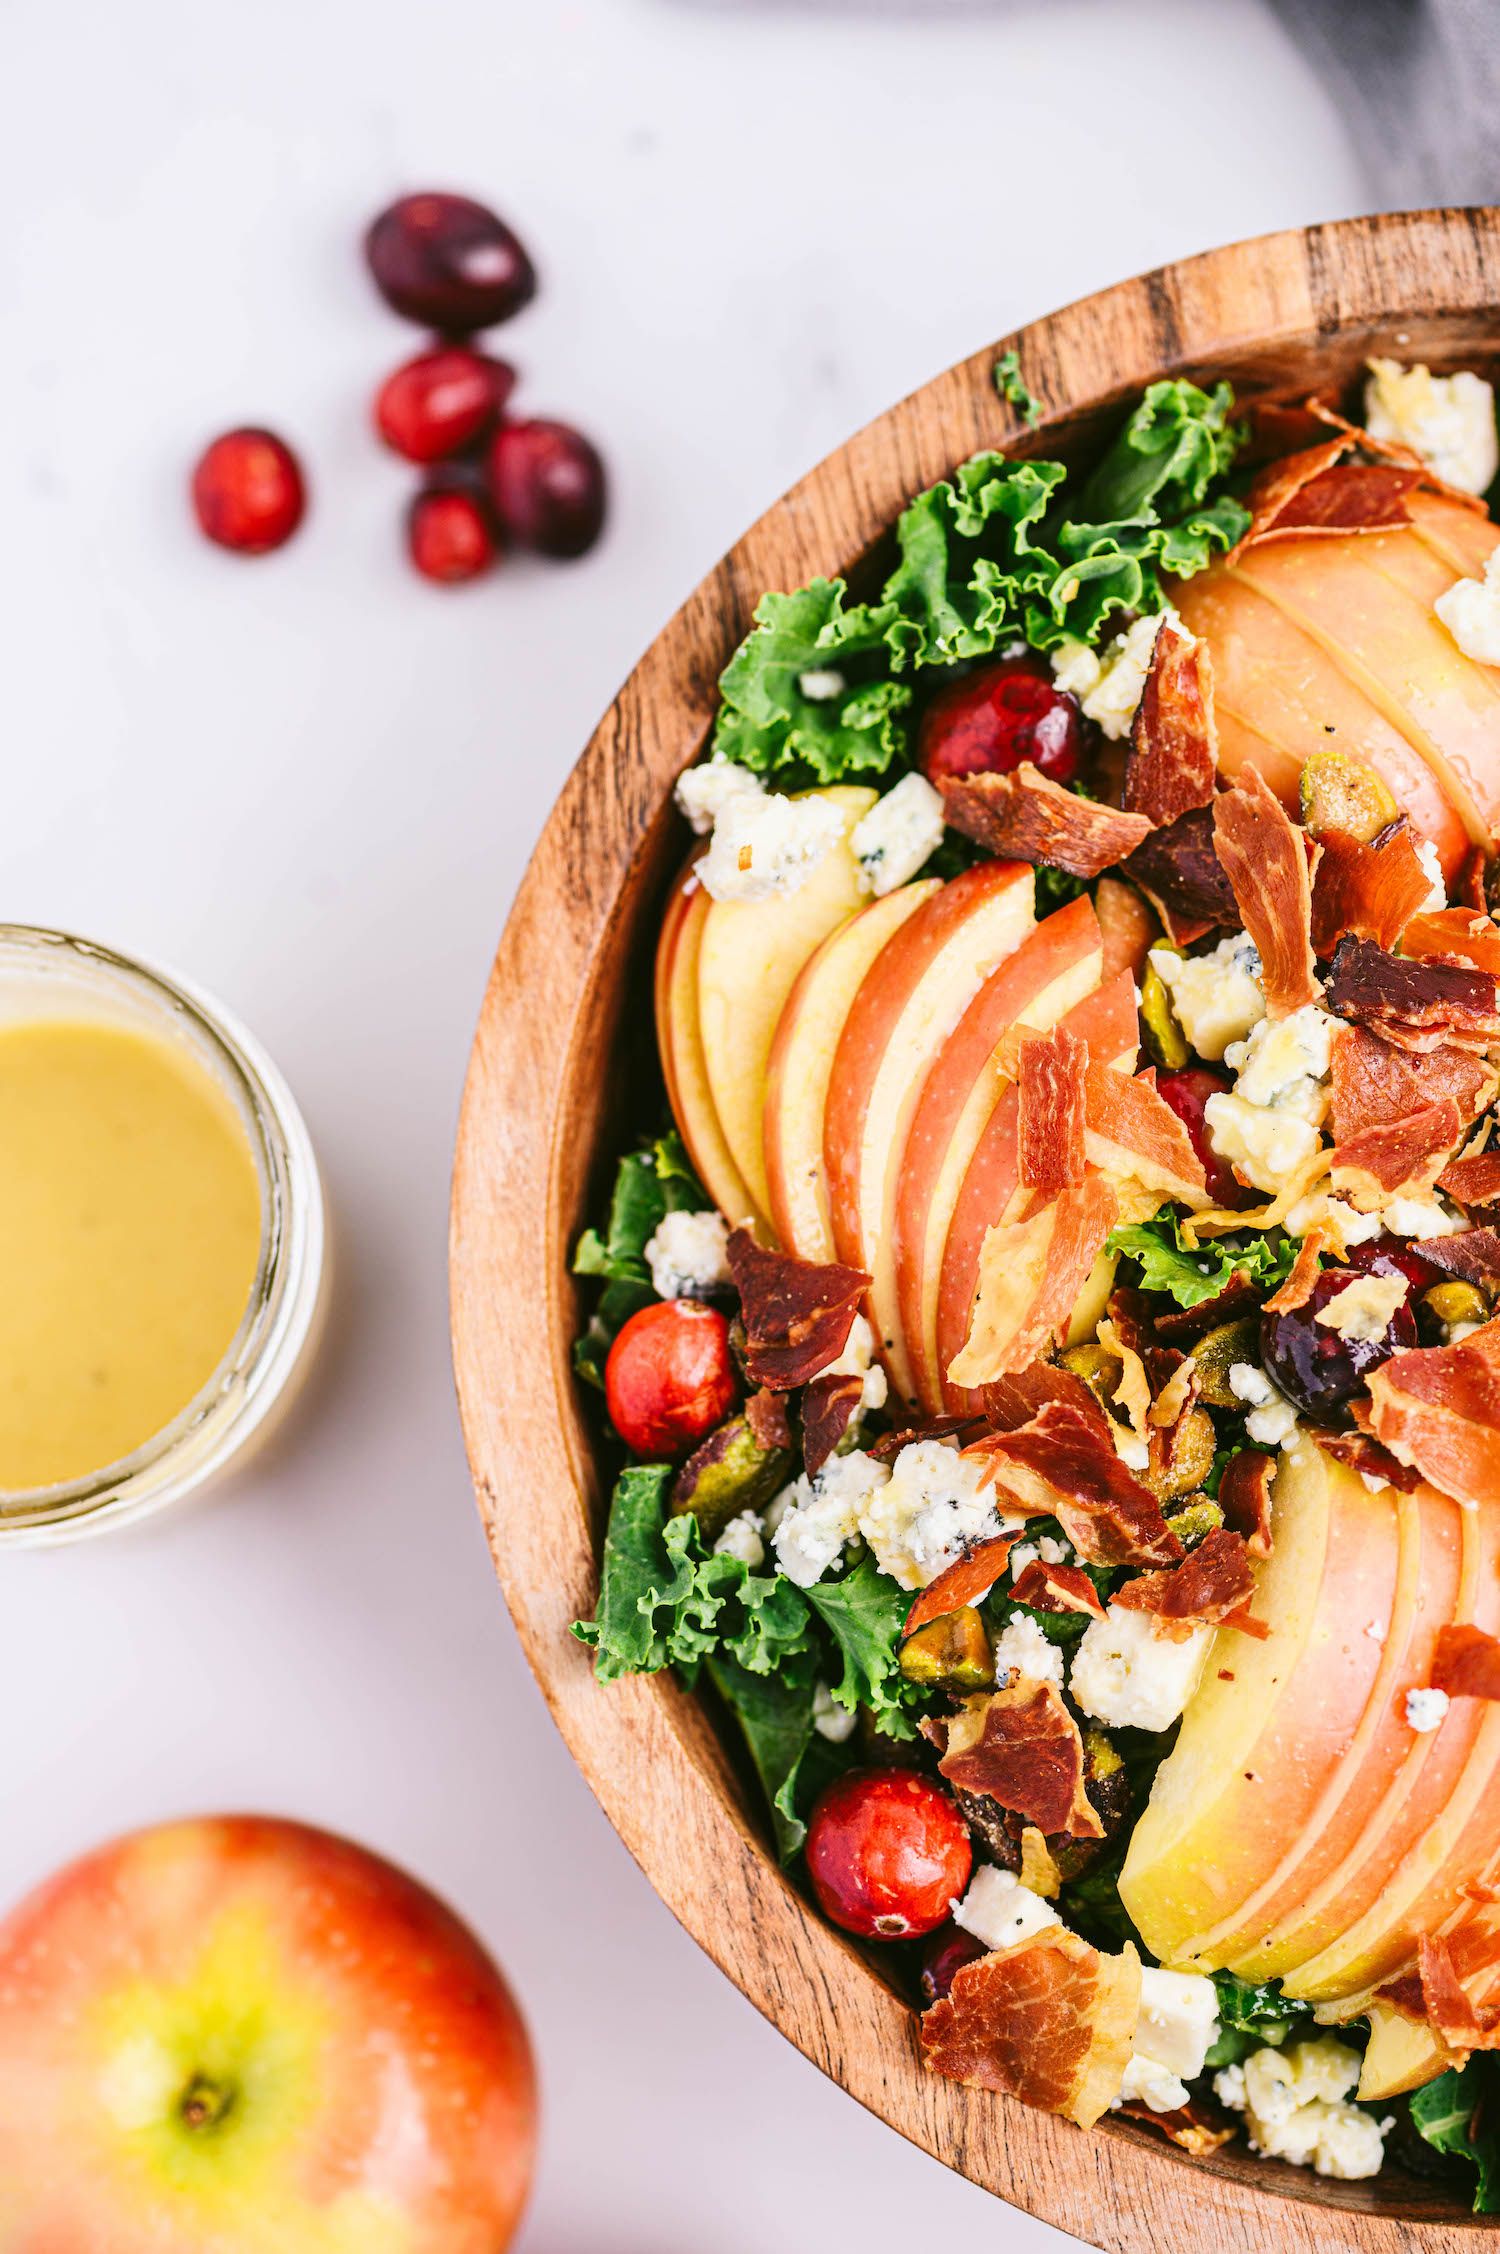 Apple, Cranberry, and Kale Salad